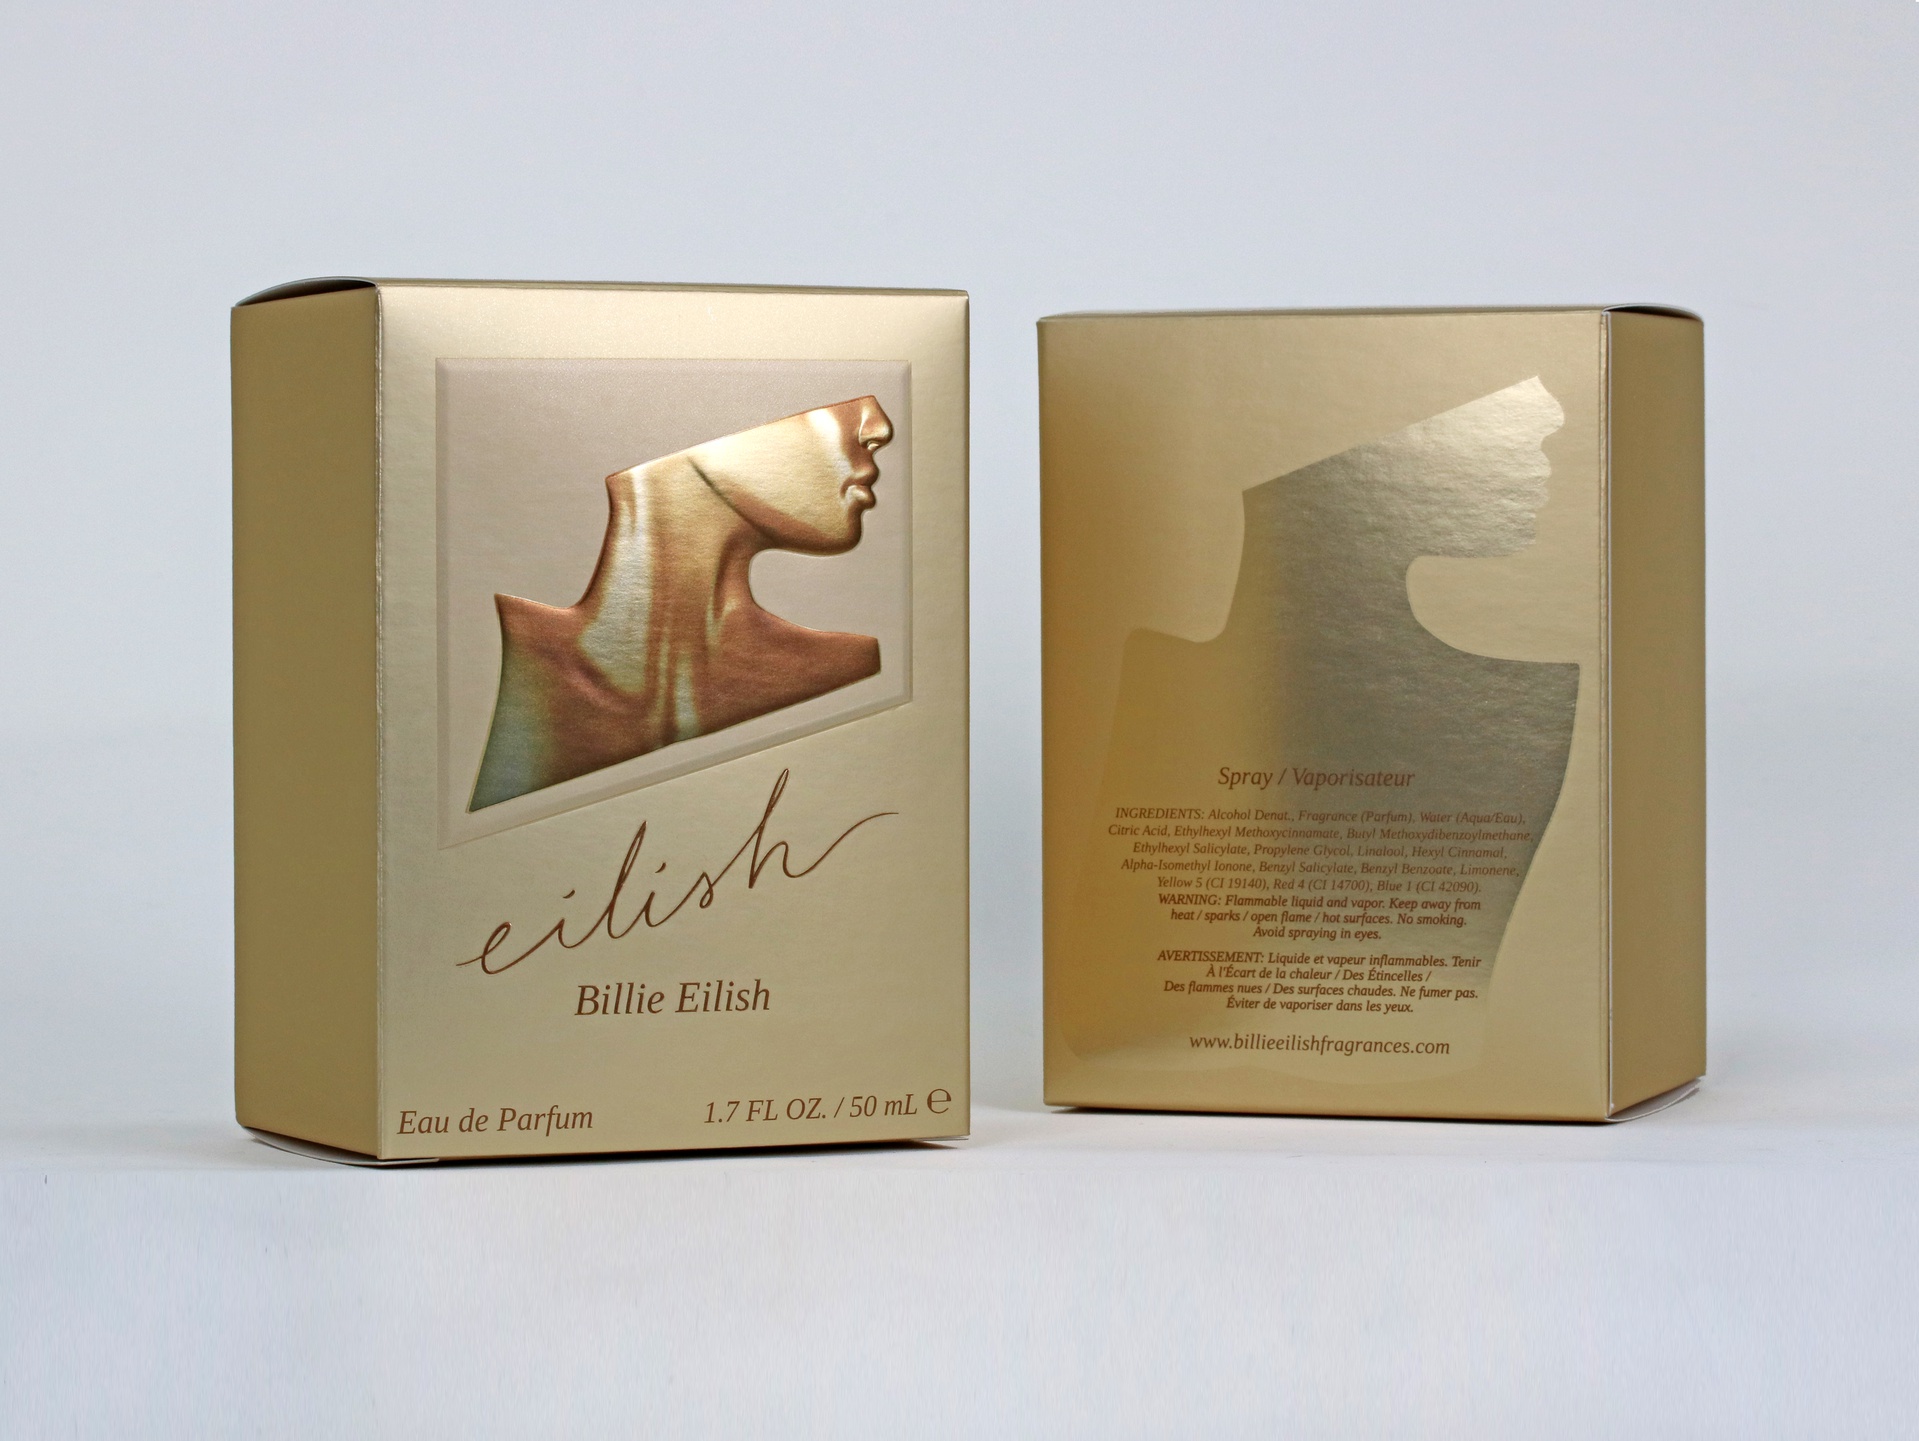 Billie Eilish folding cartons (angled front view)